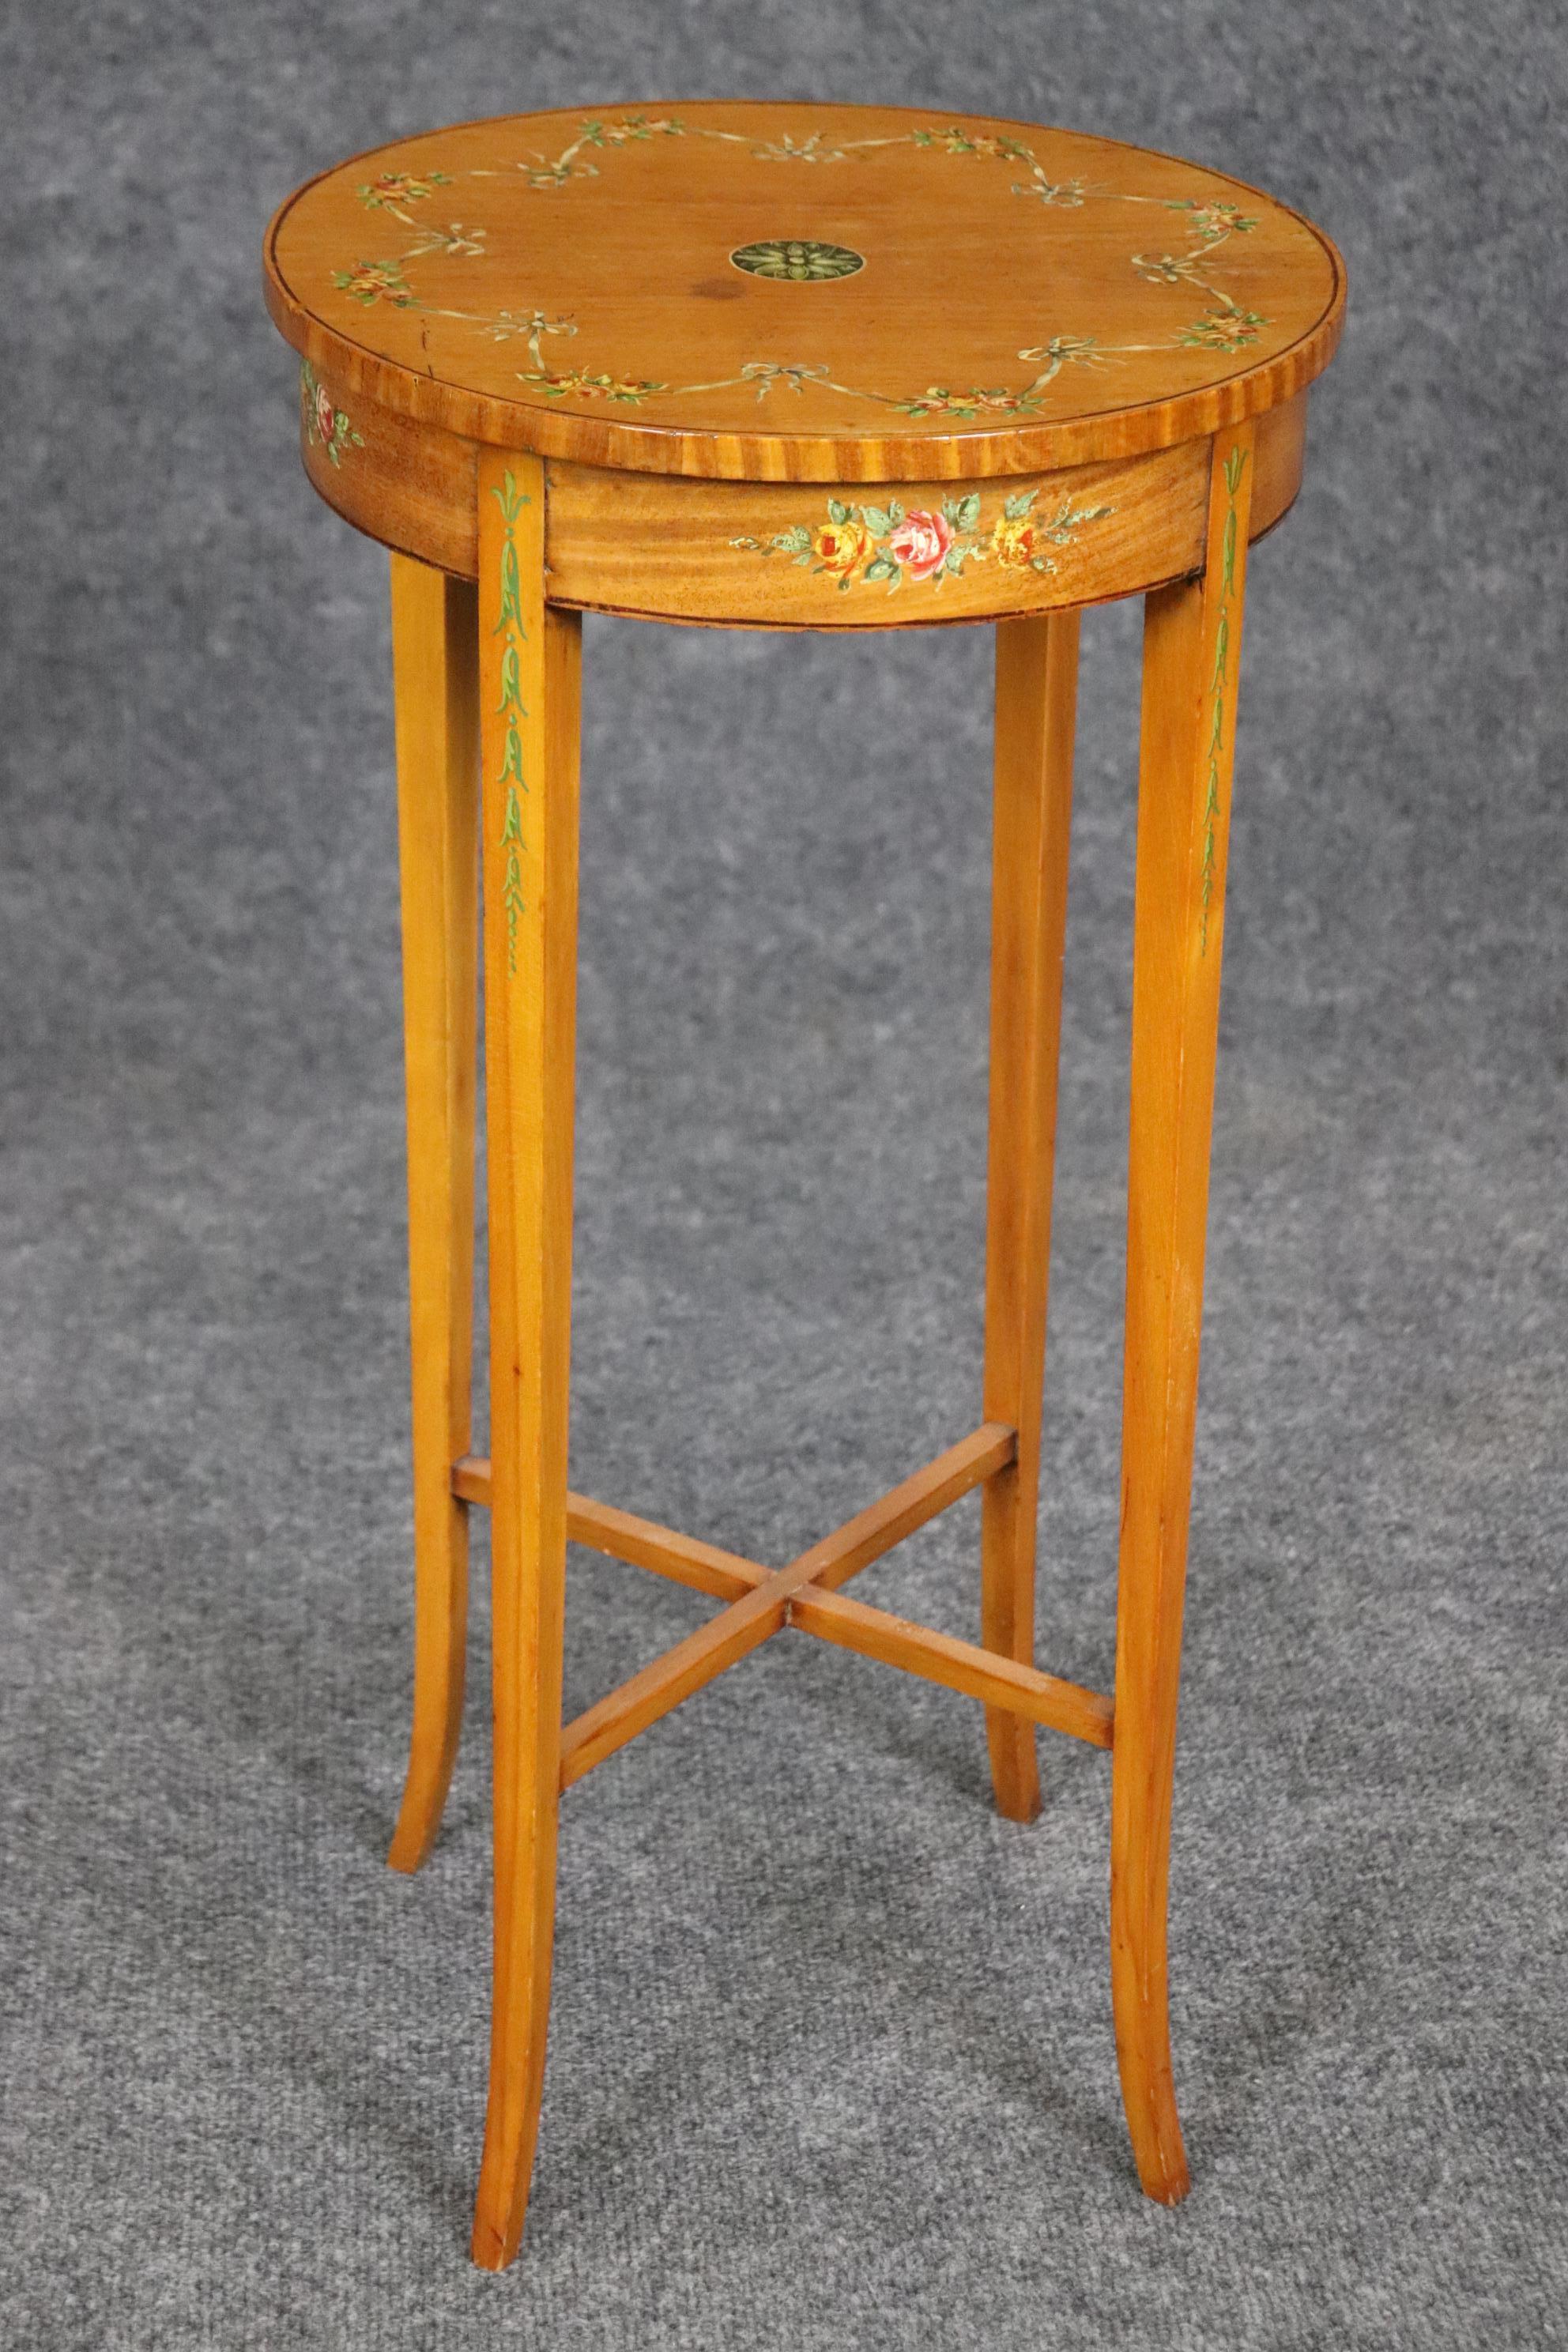 Adam Style Petite Antique 19th Century English Adams Style Accent Table By Gillow & Co For Sale